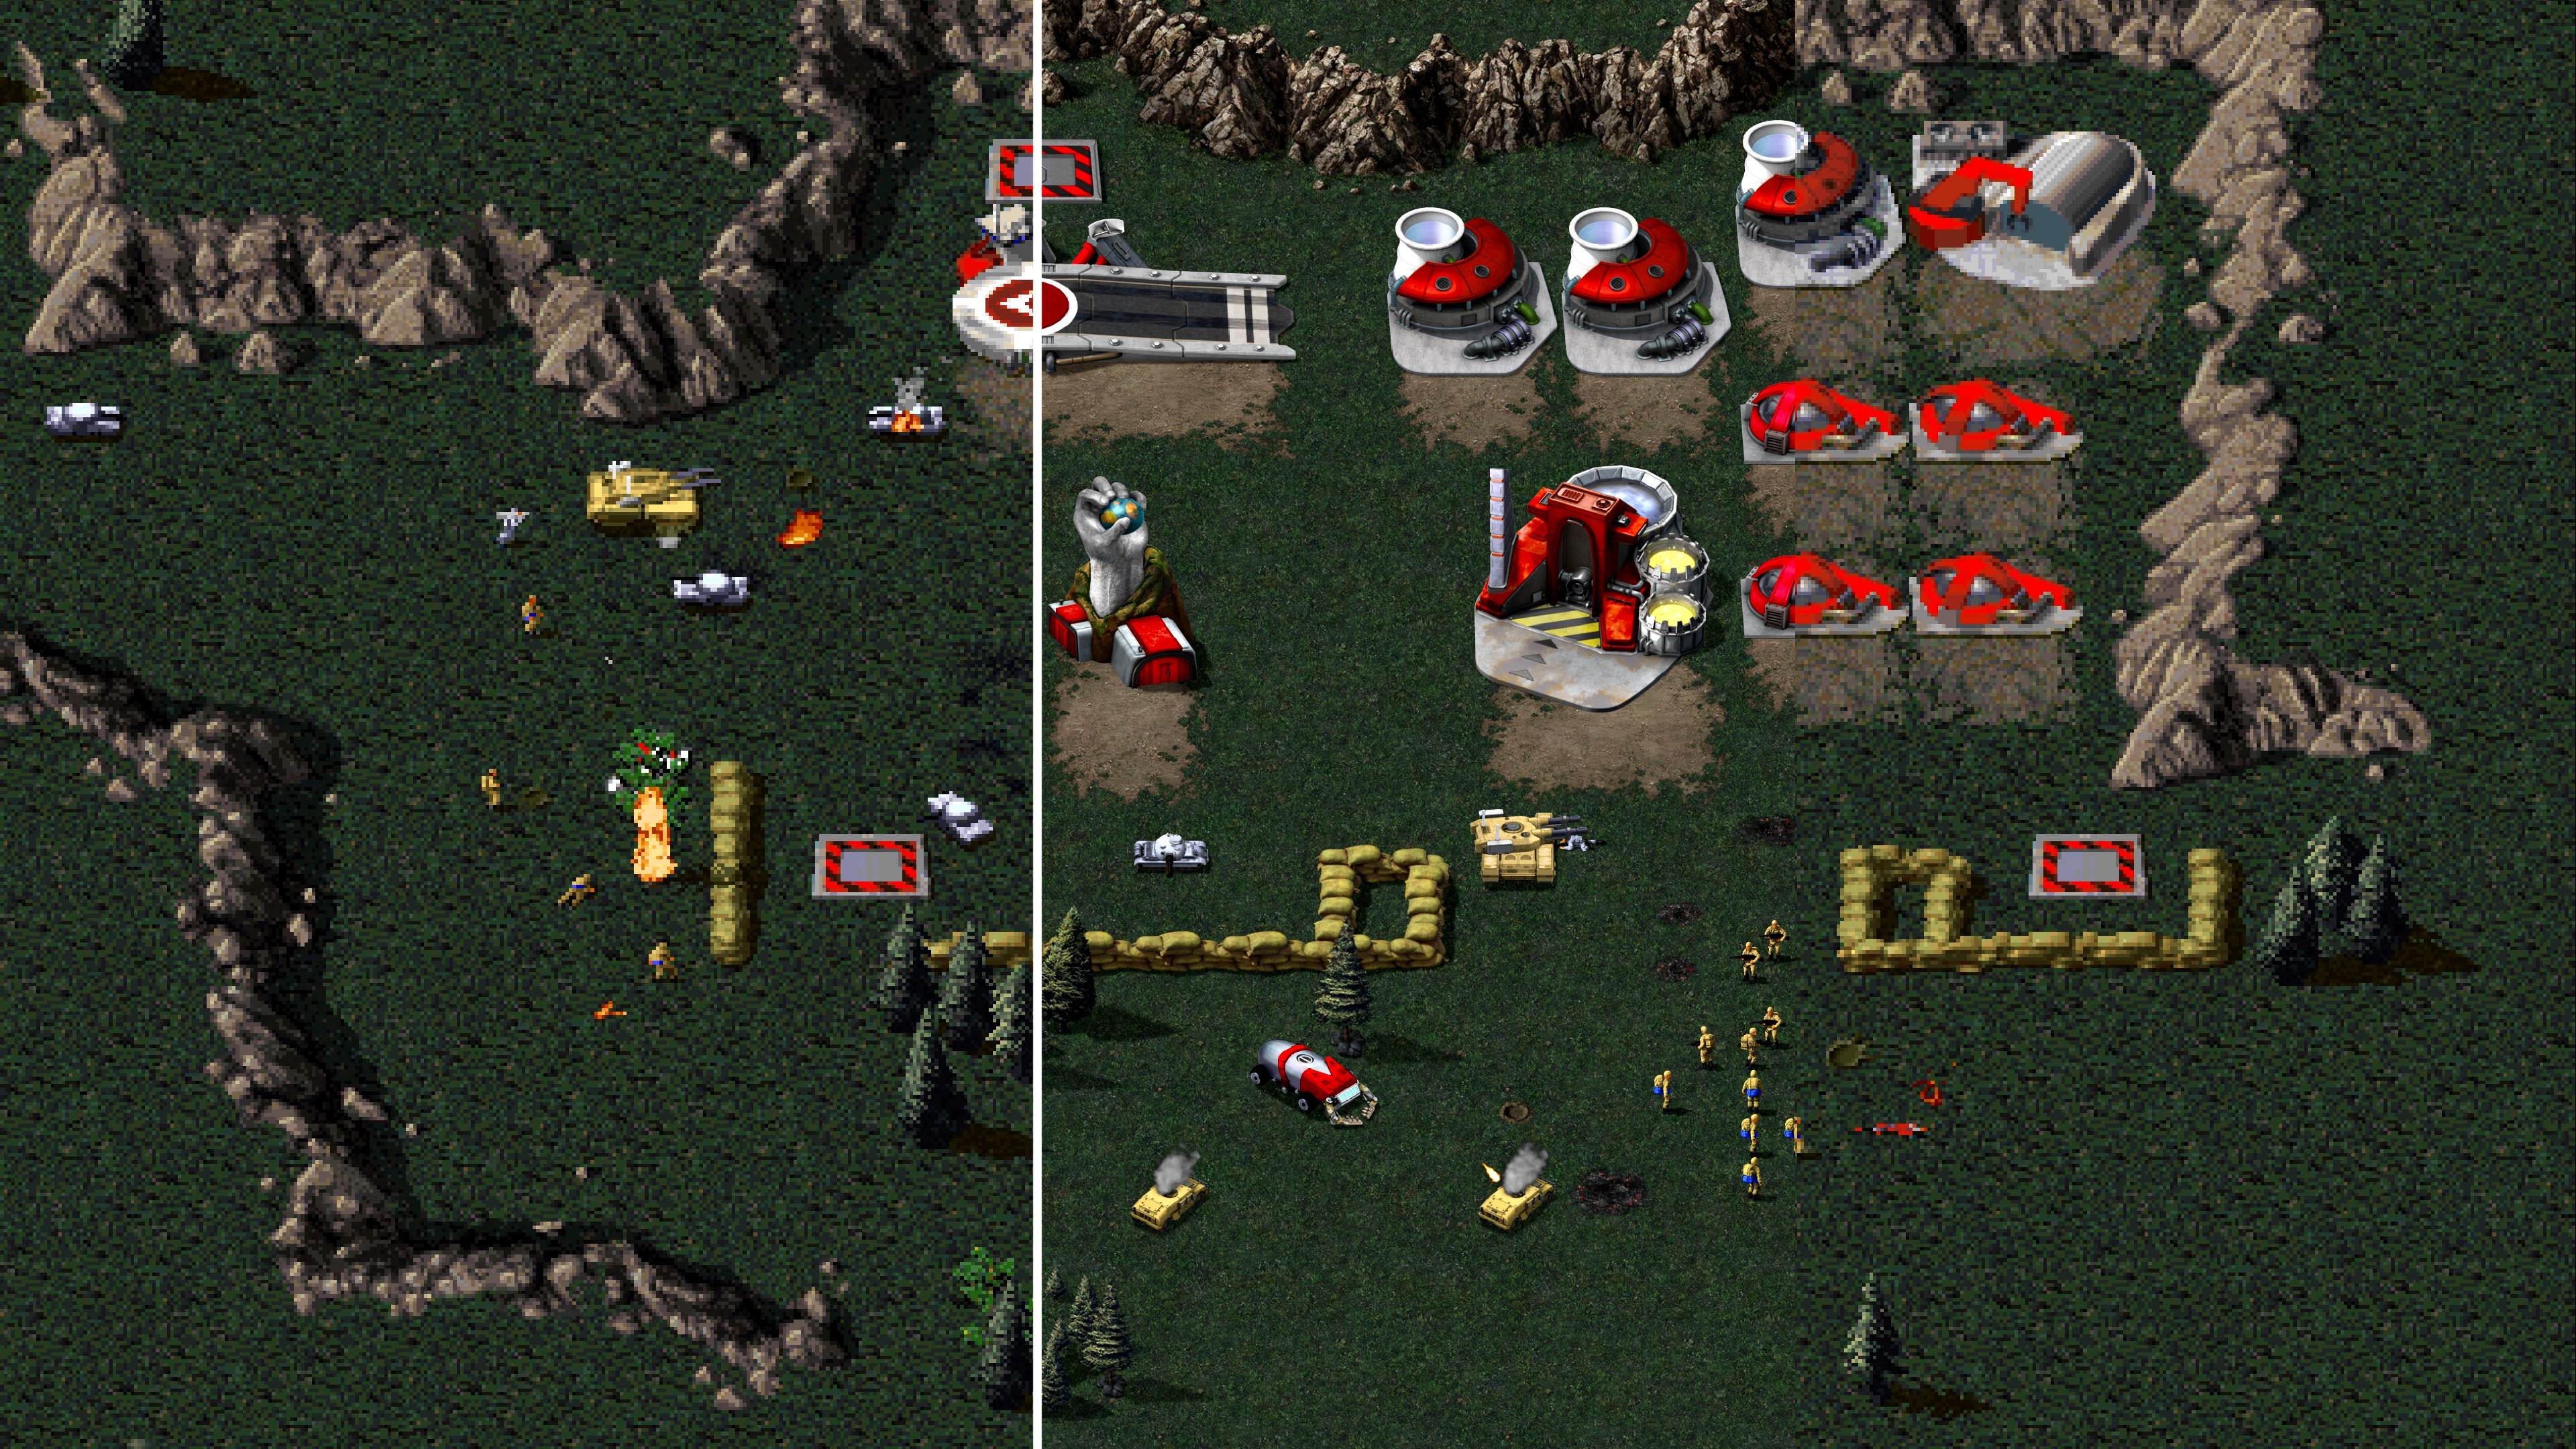 Command n. Command Conquer Remastered collection 2020. Command and Conquer 1995 Remaster. Command Conquer Tiberian Dawn Remastered. CNC Remastered collection.